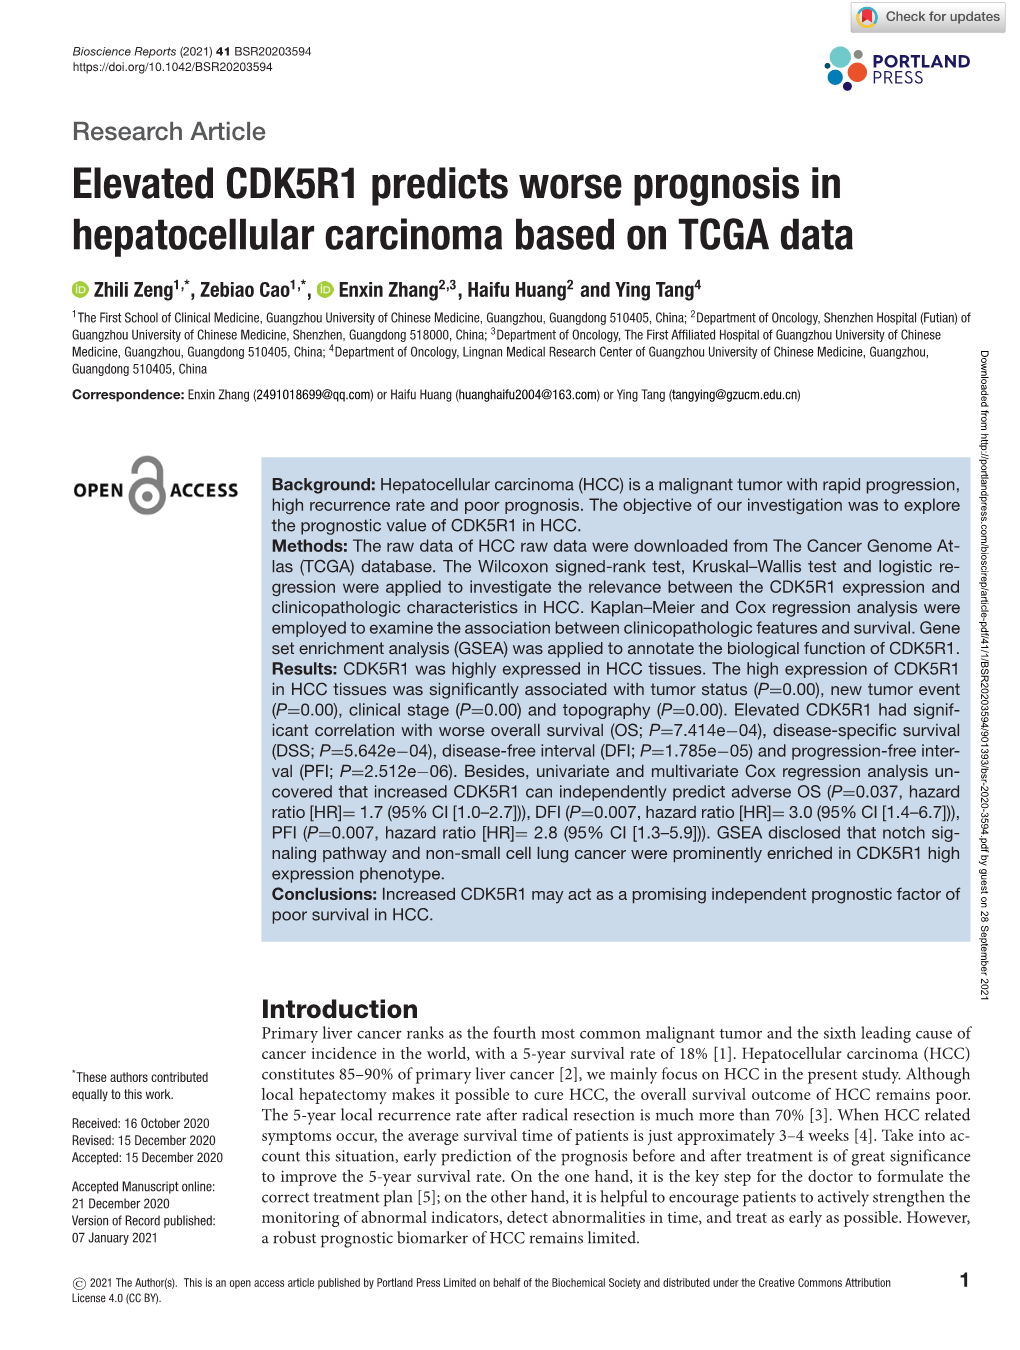 Elevated CDK5R1 Predicts Worse Prognosis in Hepatocellular Carcinoma Based on TCGA Data